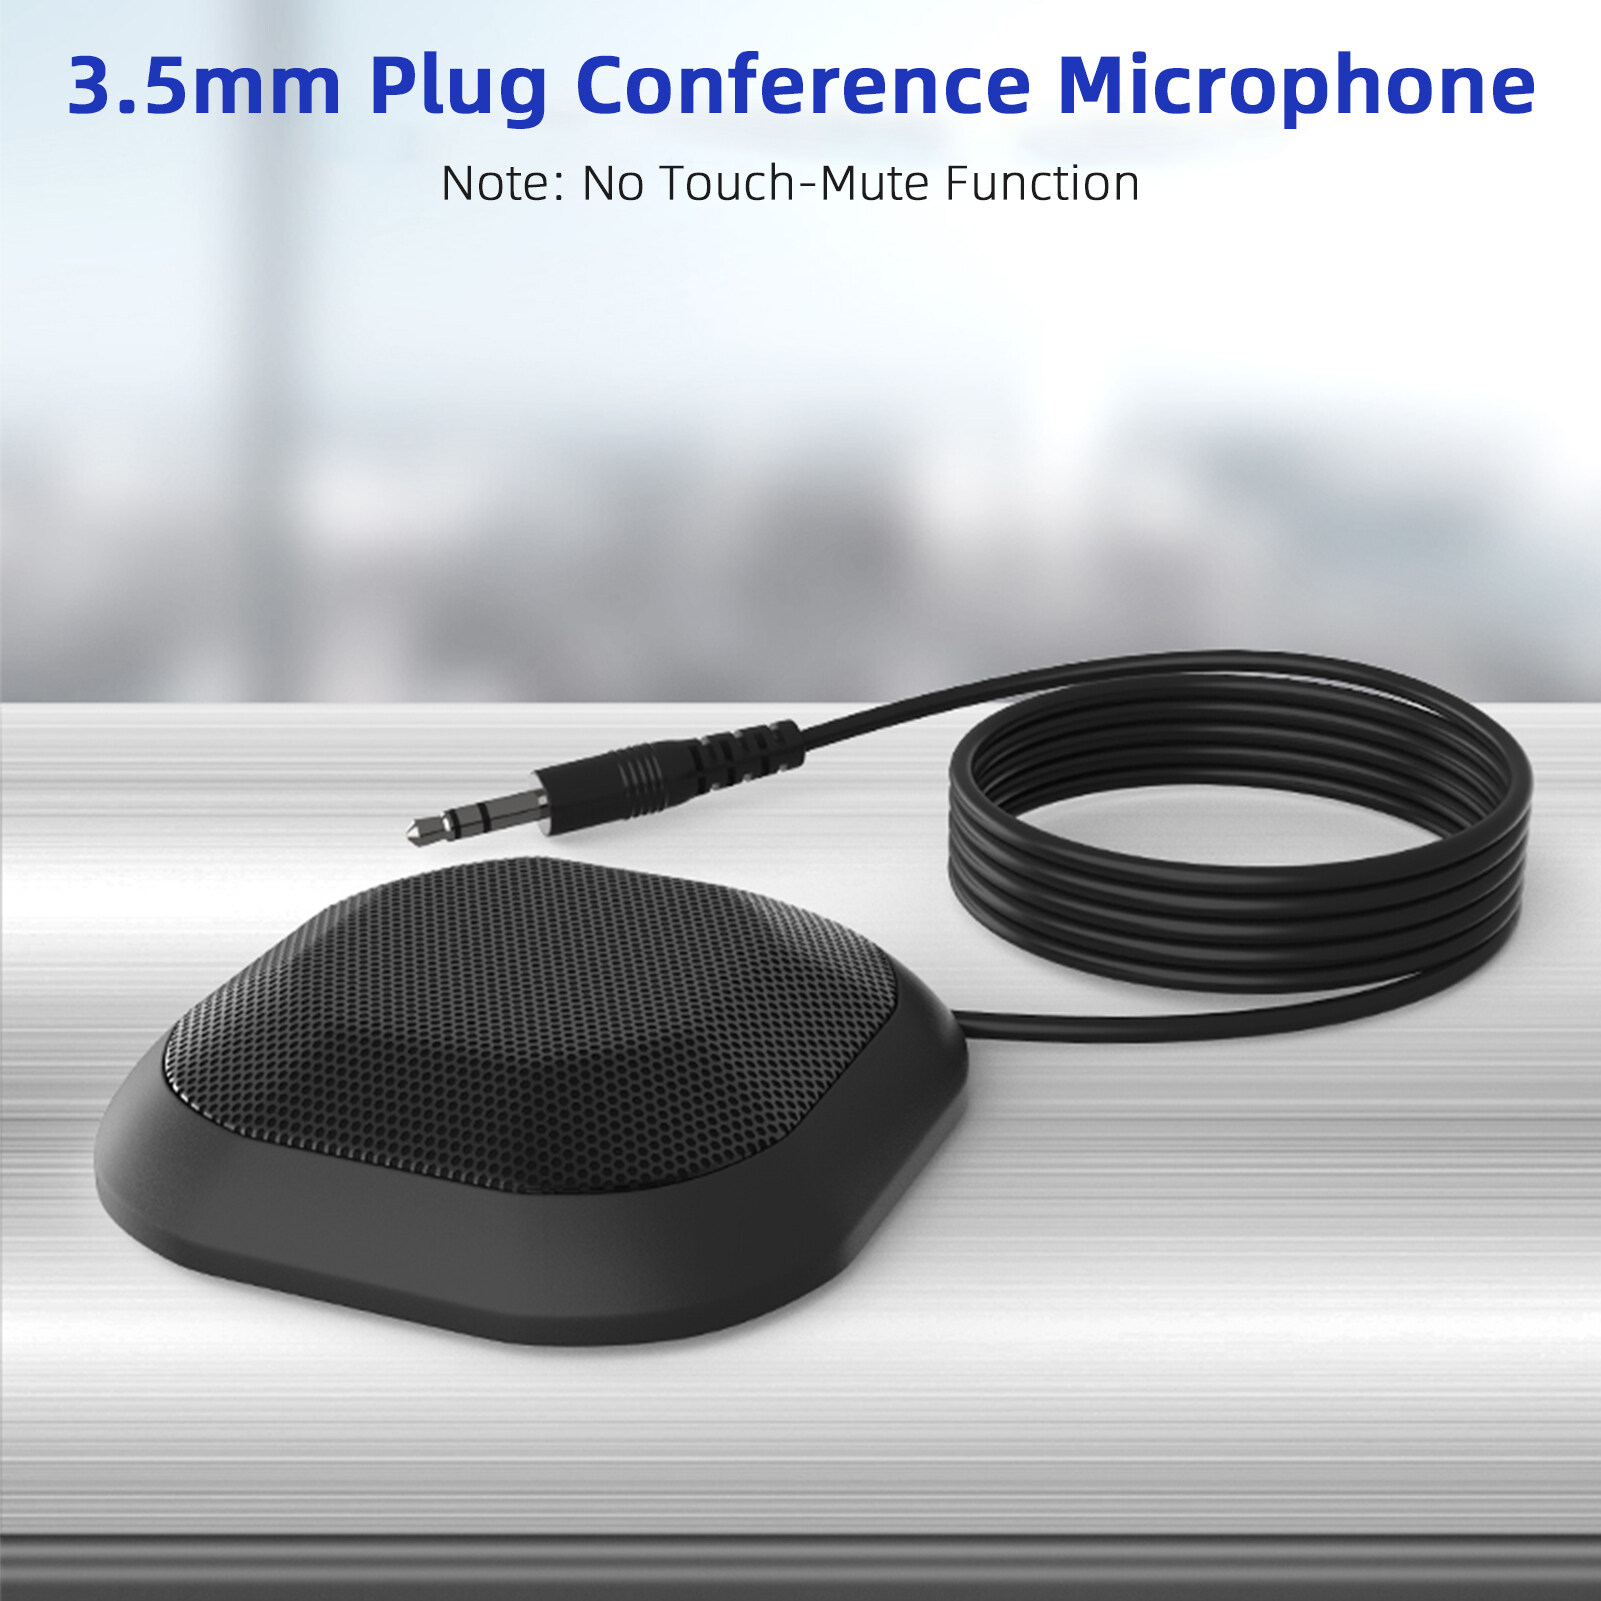 Chatting USB Conference Omnidirectional Computer Condenser Microphone with Mute Button Compatible with Mac OS Windows Plug&Play Microphone for Video Conference JOOWIN Microphone Online Course 